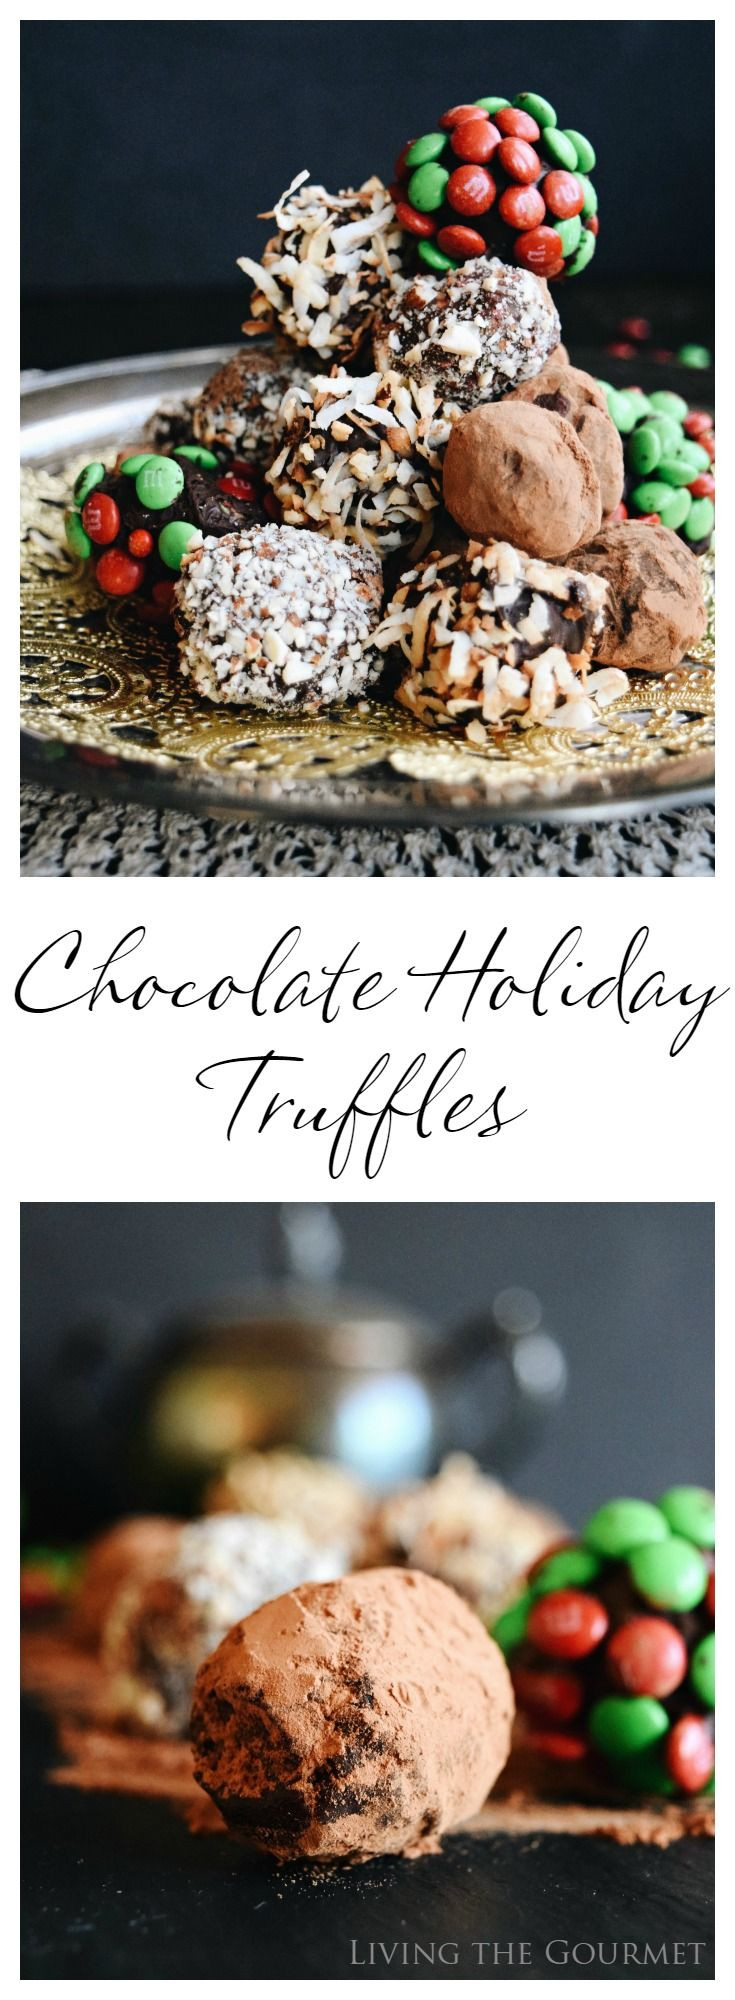 Gourmet Christmas Candy
 1000 ideas about Candy Stores on Pinterest